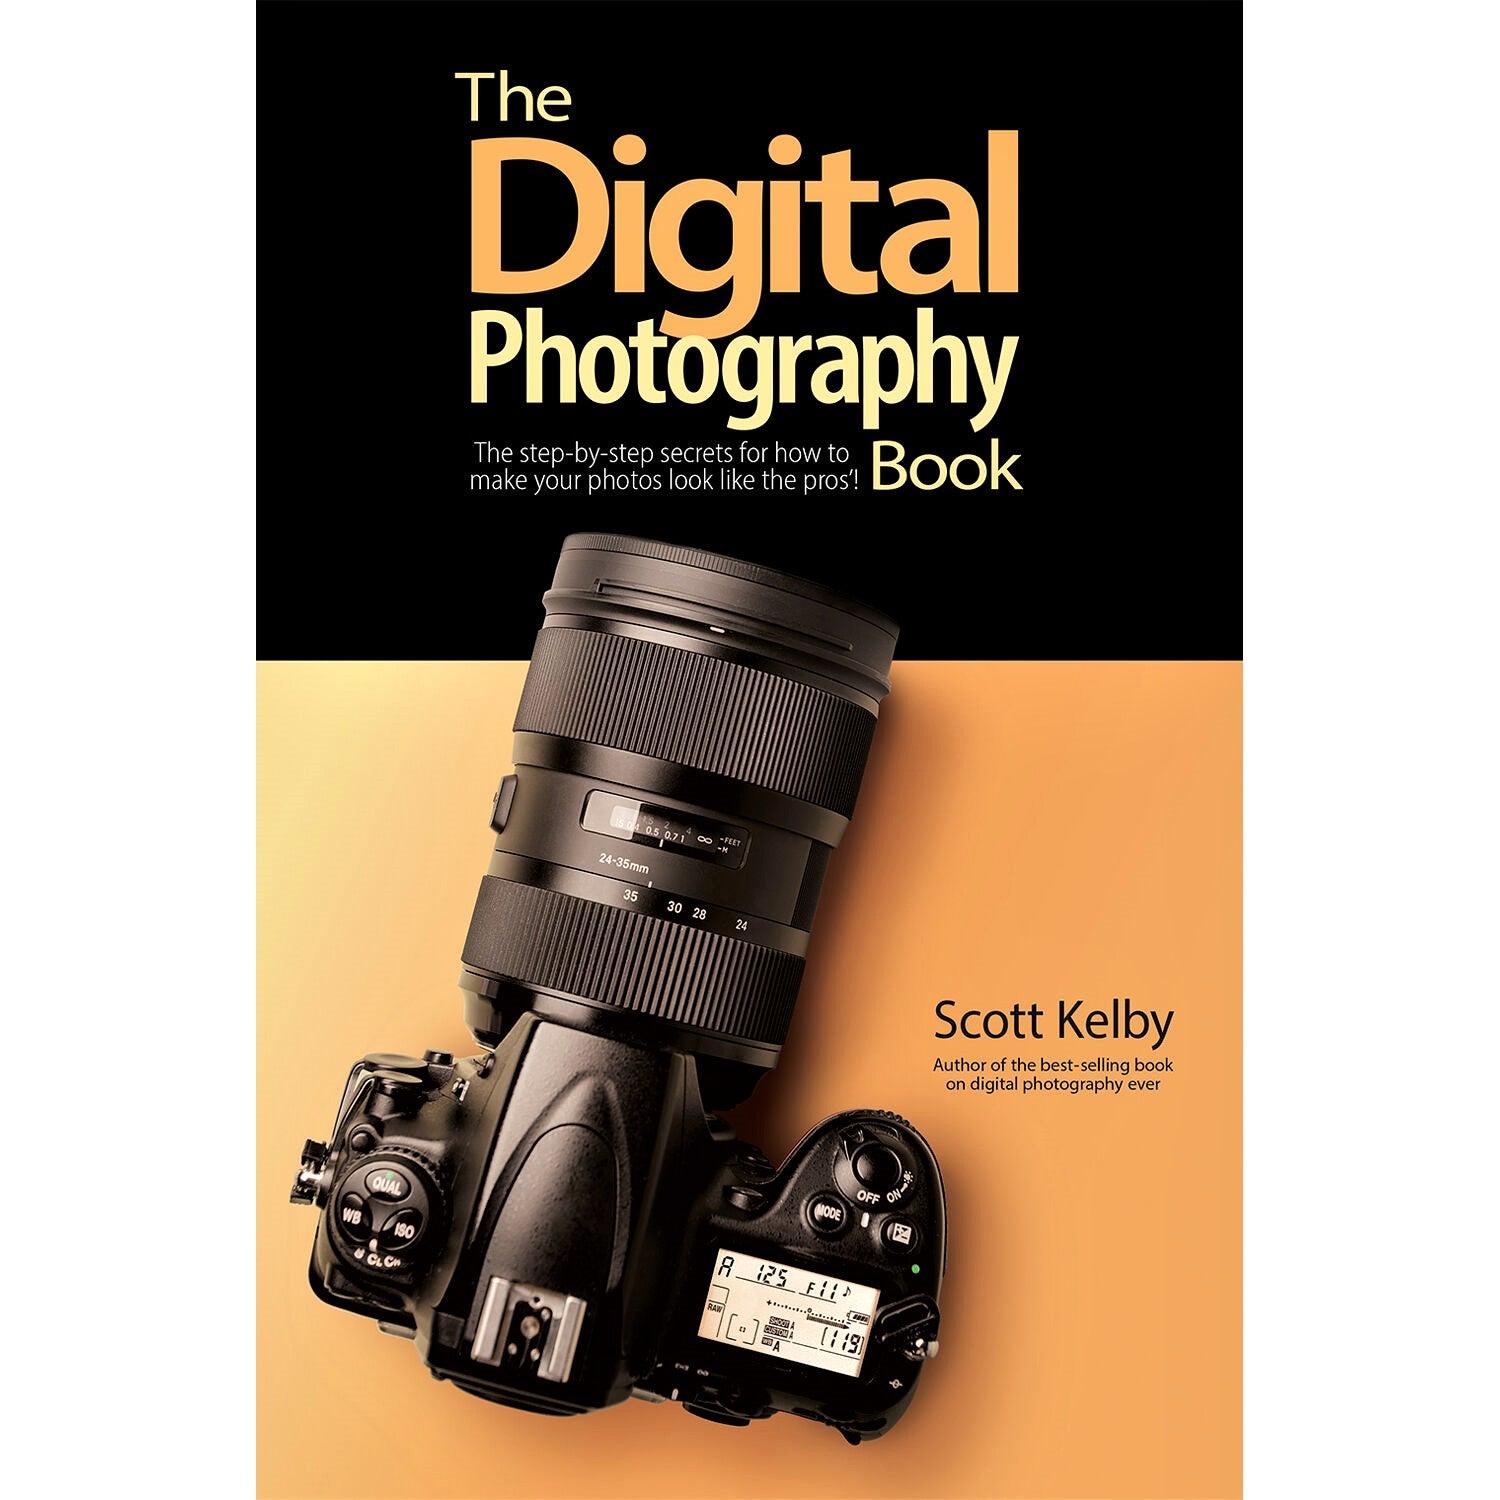 The Digital Photography Book: The Step-by-Step Secrets for How to Make Your Photos Look Like Pros